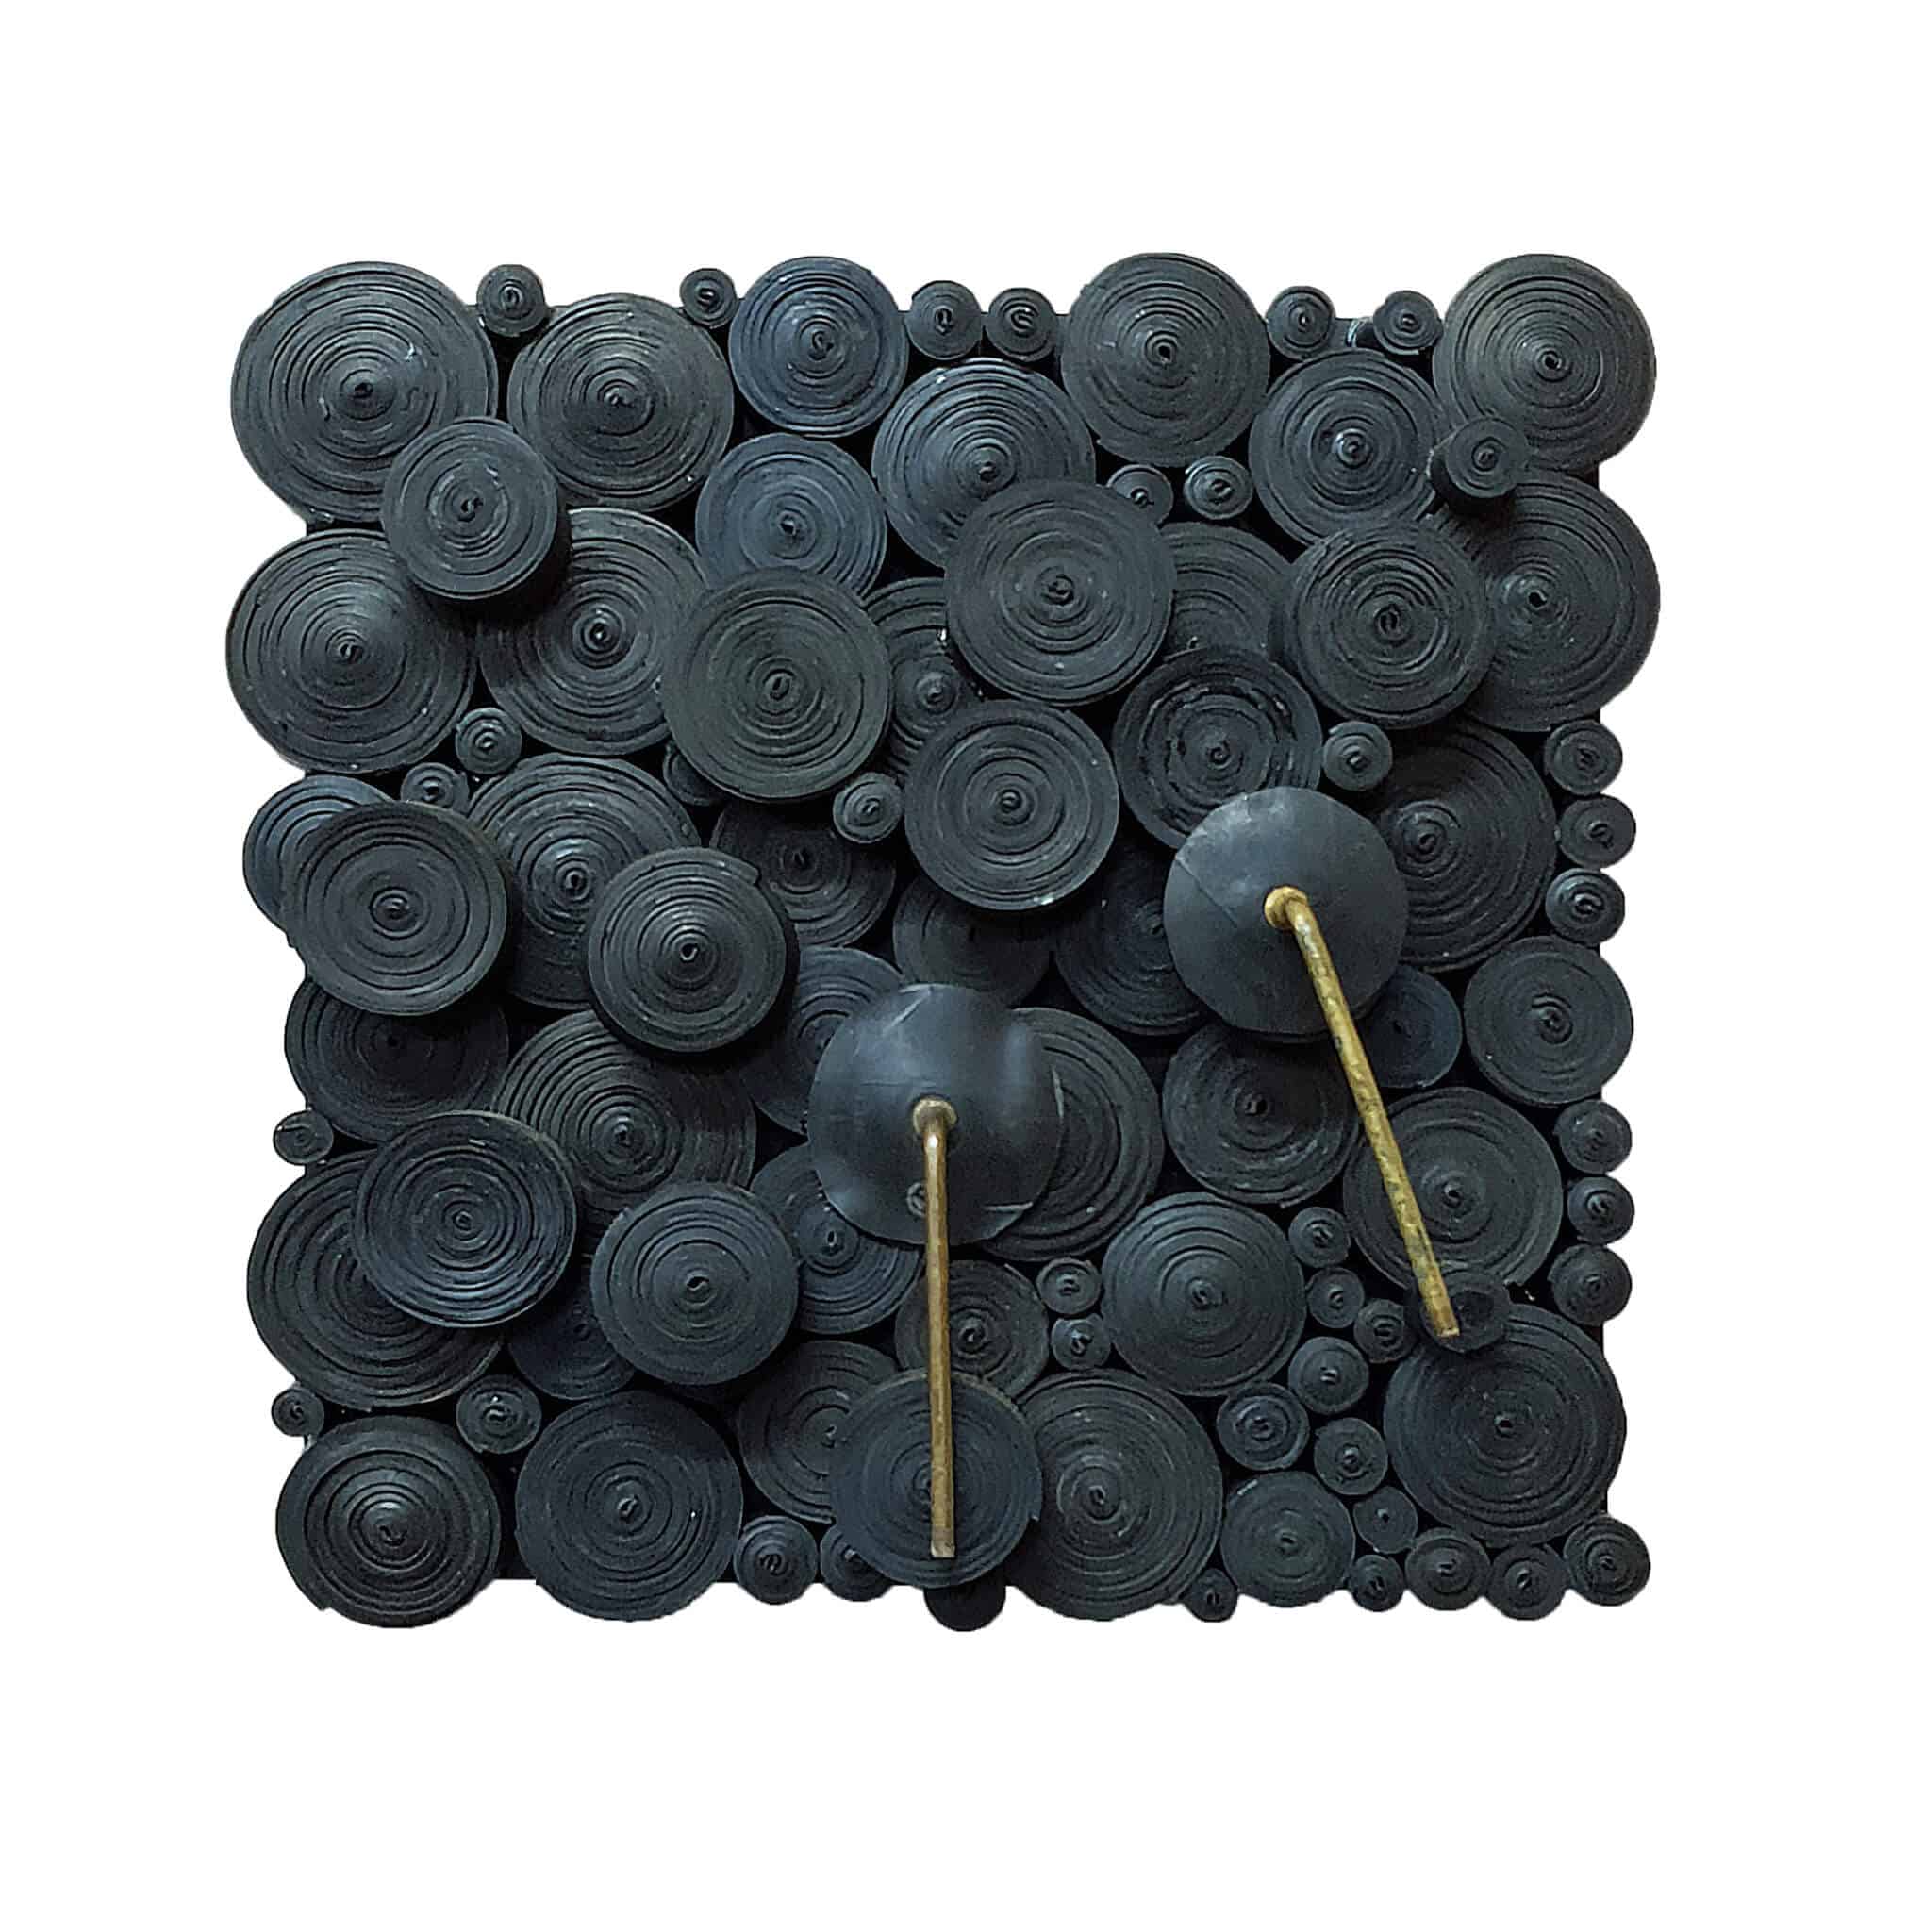 Patrick Bongoy, Fragments, 2019, Recycled rubber on wooden board, 45 x 45 cm. Courtesy This is Not a White Cube 